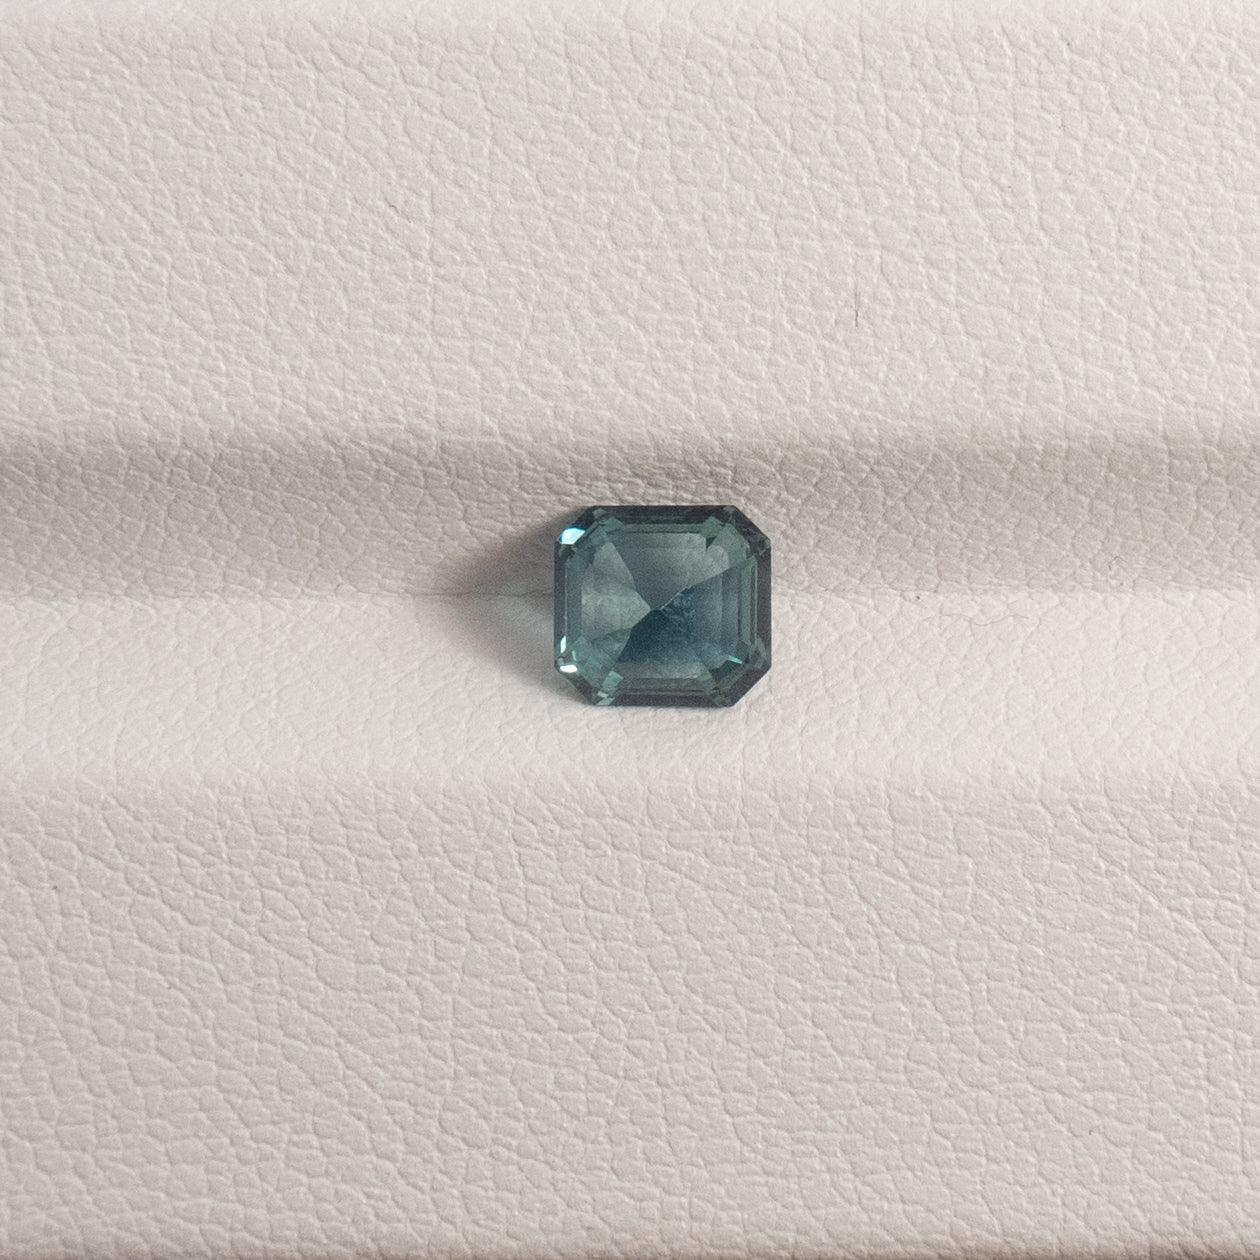 Teal Sapphire Natural No Heat 1.16ct - The Colored Stone Co.